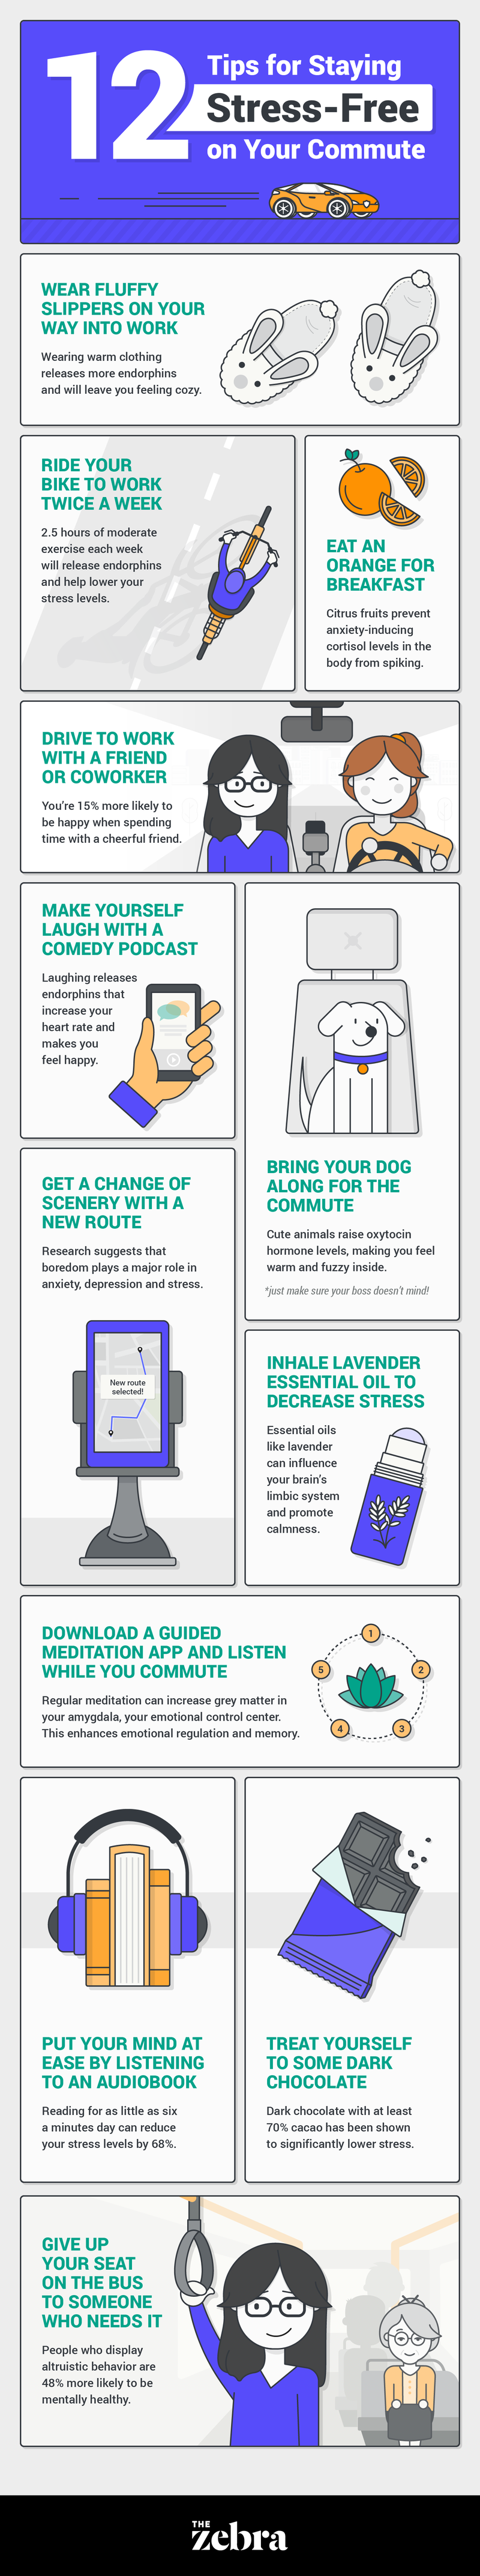 stress-free commute tips